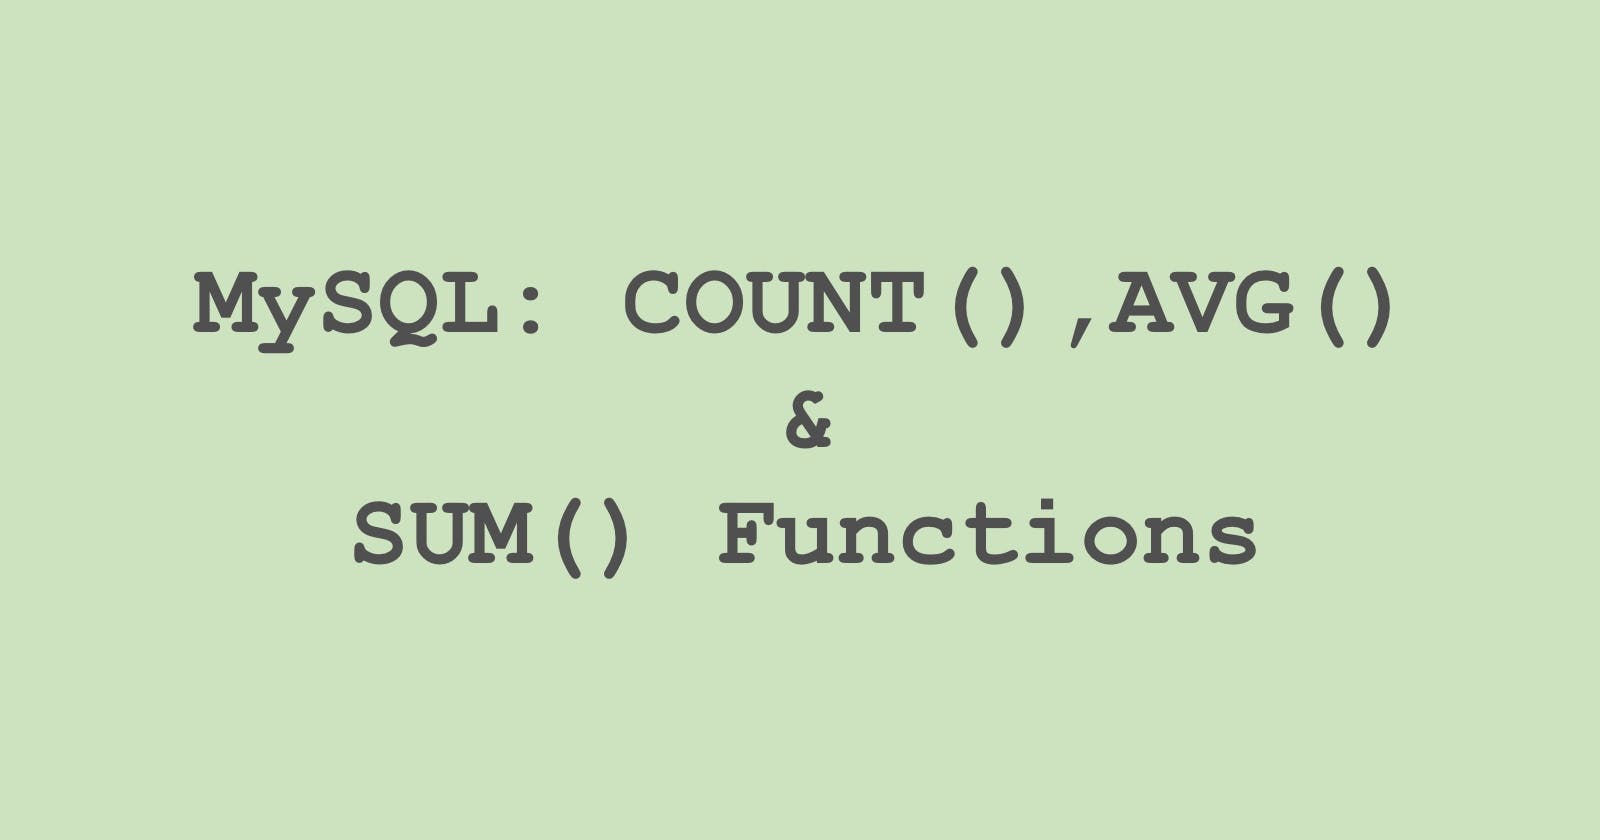 10. MySQL: COUNT(), AVG() and SUM() Functions